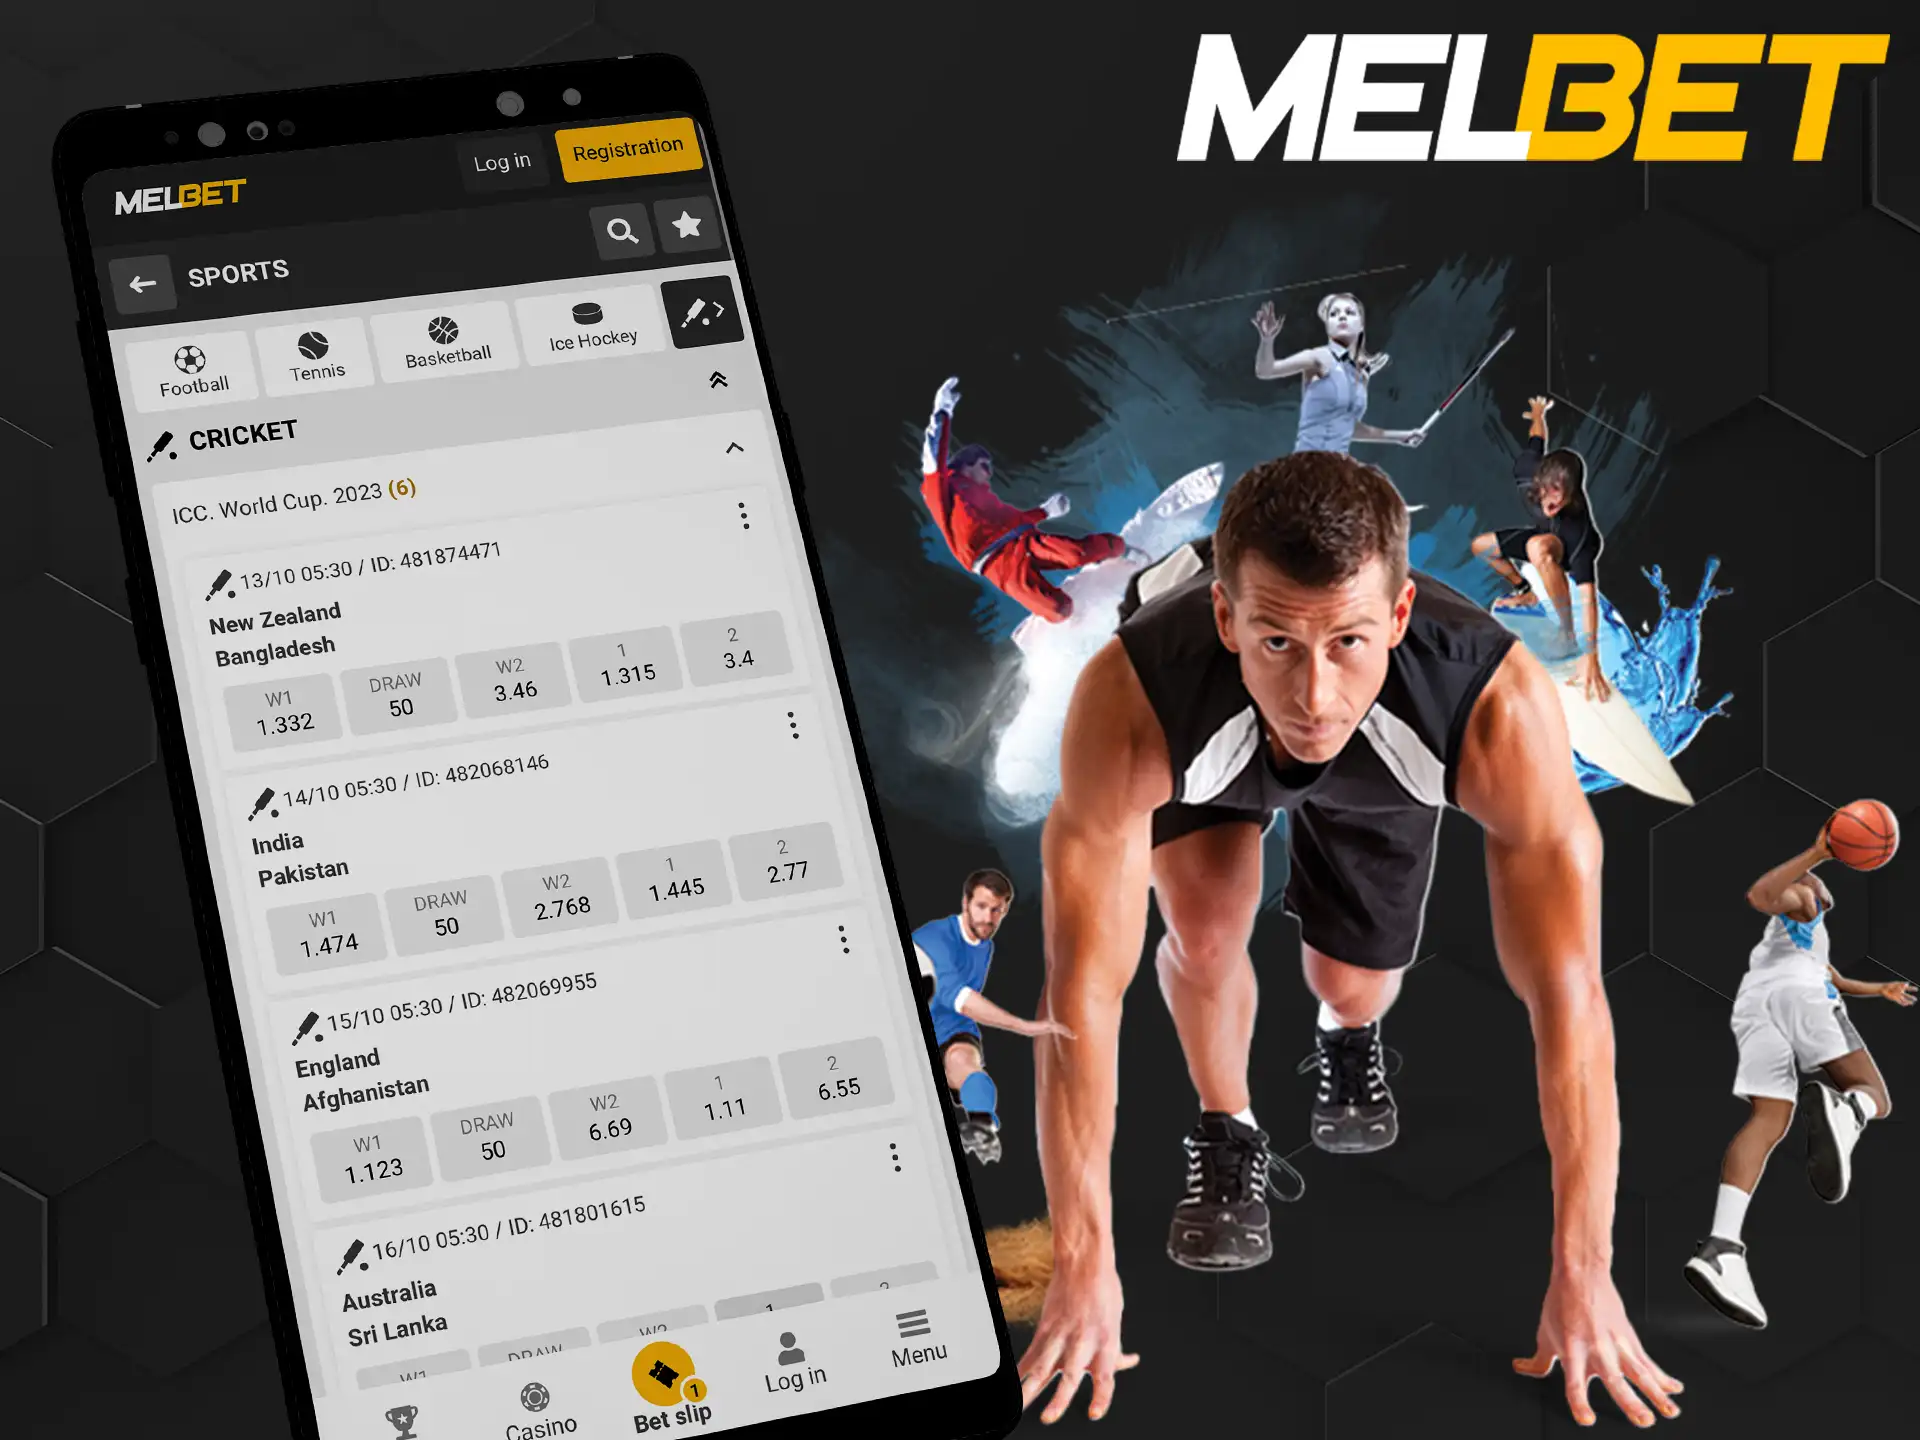 Reasons for the popularity of Melbet service